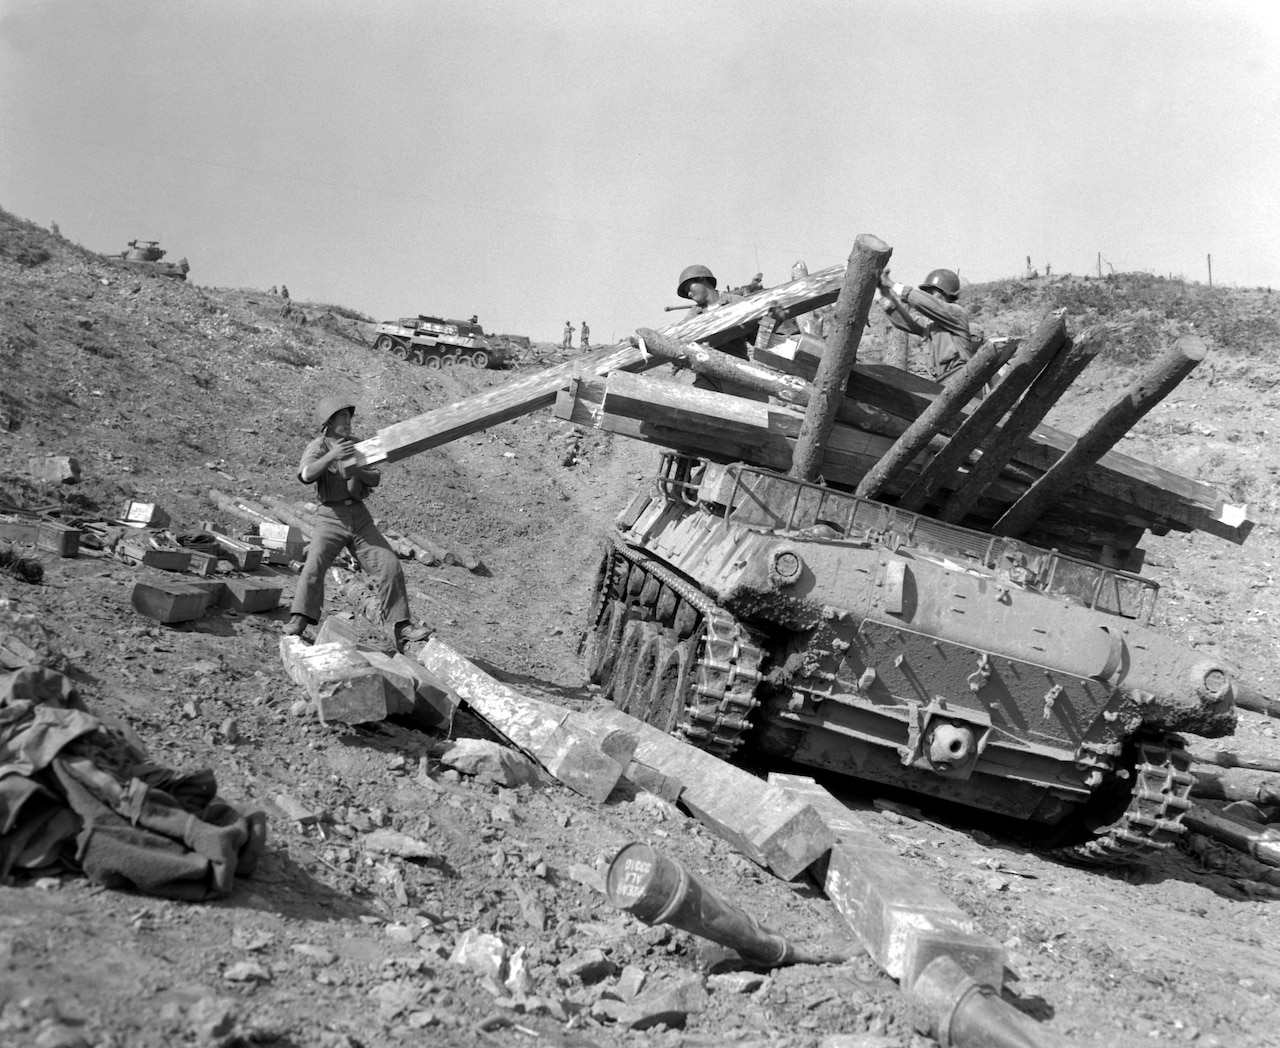 Three men load a large log onto a tank along a barren hill in a black and white photo.